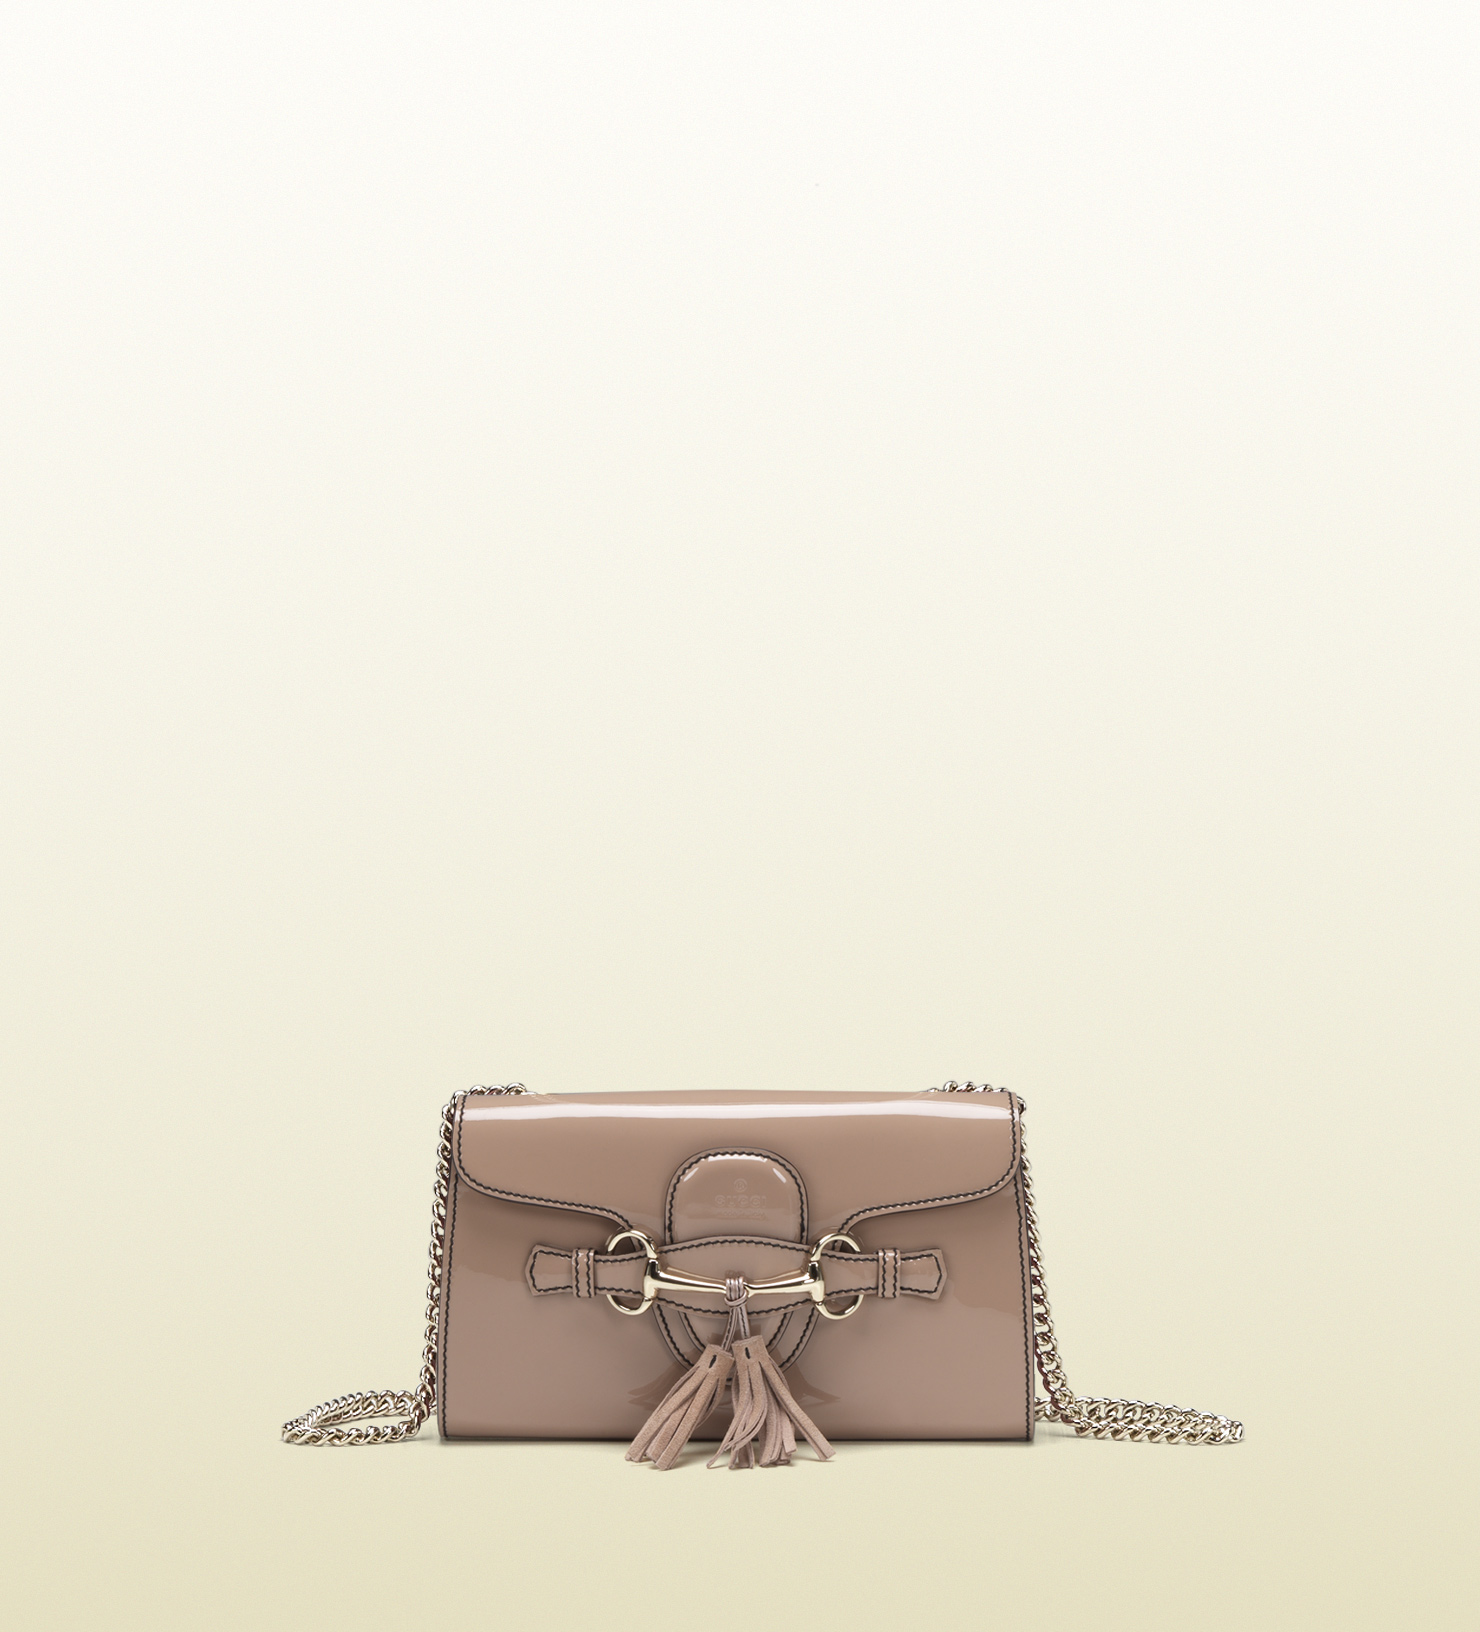 Gucci Emily Light Pink Patent Leather Chain Shoulder Bag - Lyst